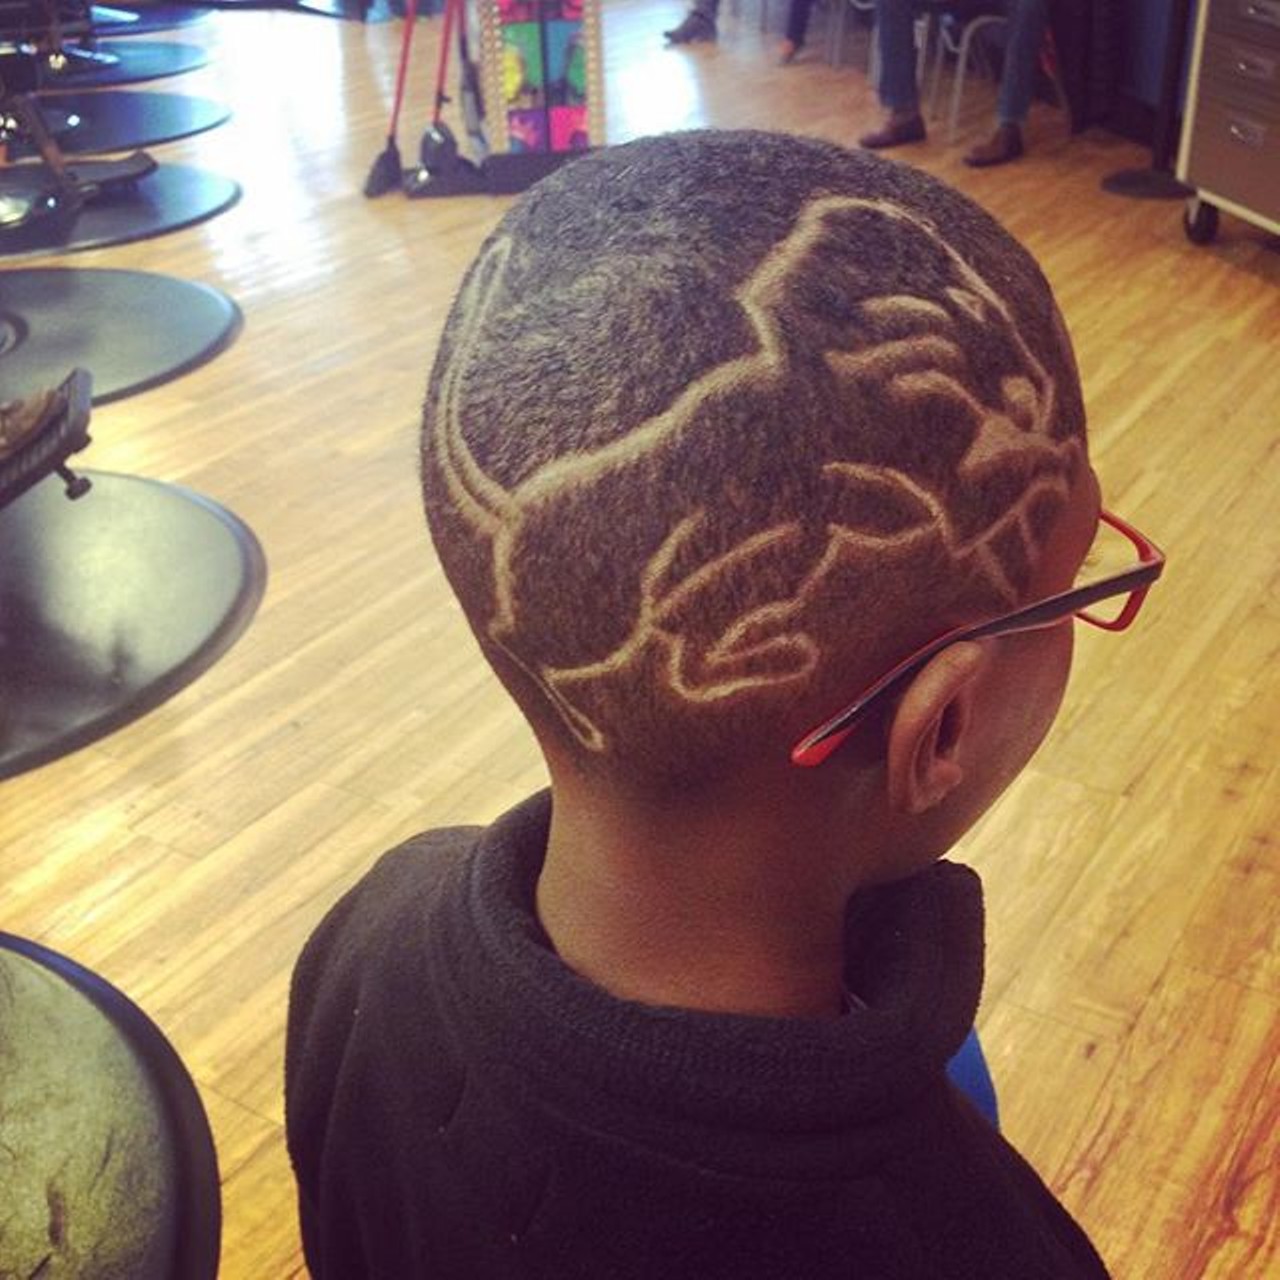 We show our #OnePride from our head.... (Instagram user @judesbarbershop)